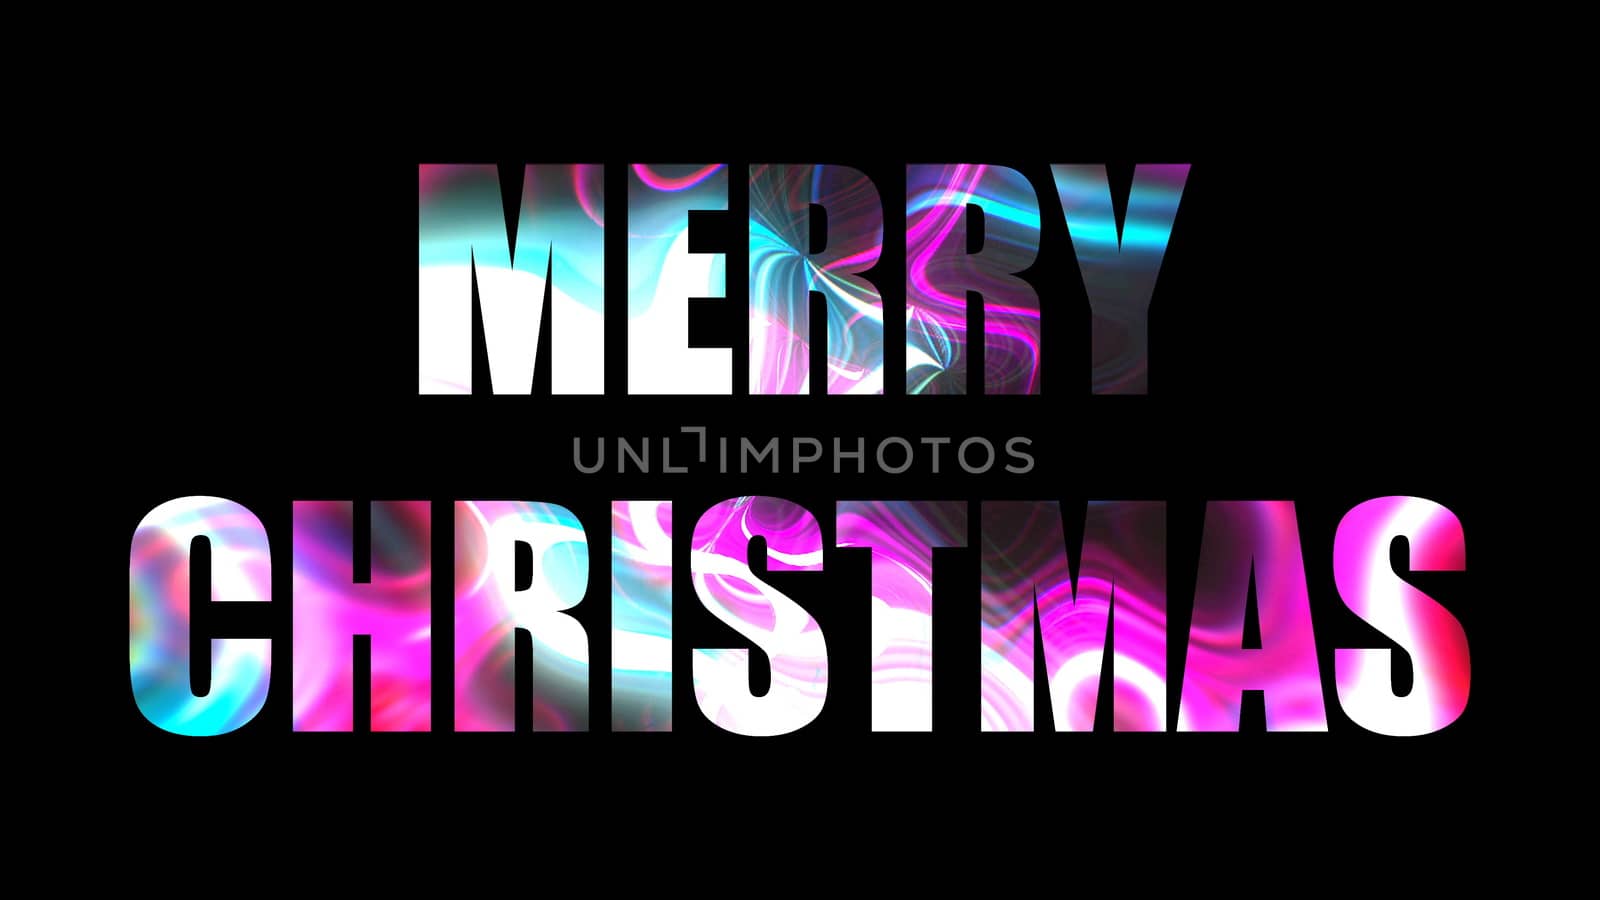 Merry christmas shiny bright text, 3d rendering background, computer generating for holidays festive design